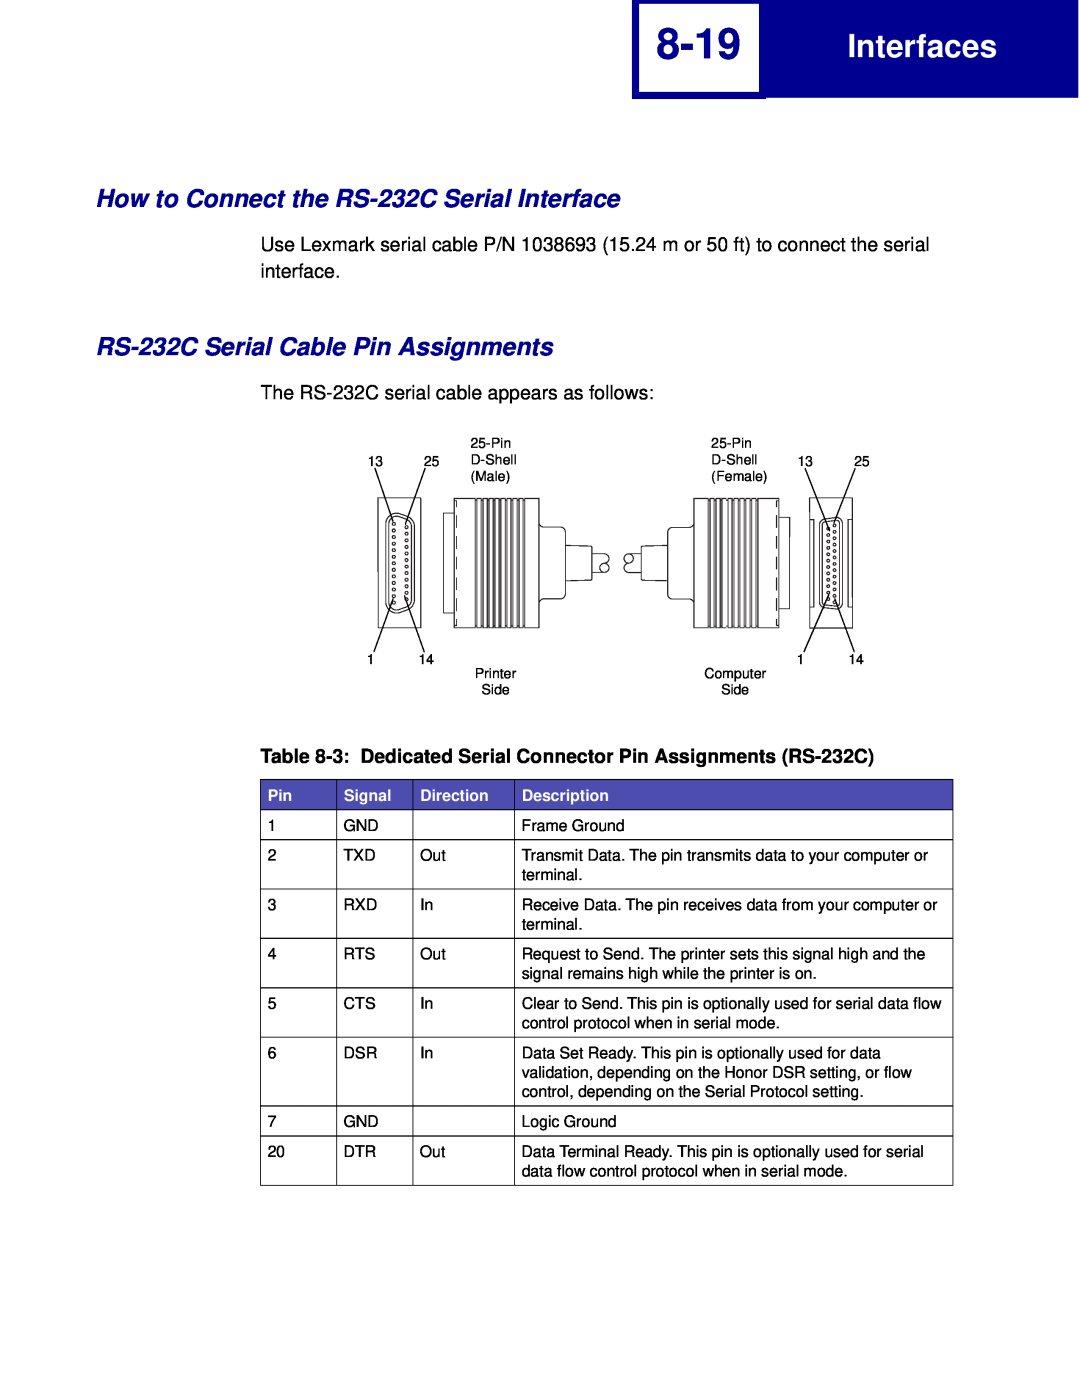 Lexmark C762, C760 8-19, How to Connect the RS-232C Serial Interface, RS-232C Serial Cable Pin Assignments, Interfaces 